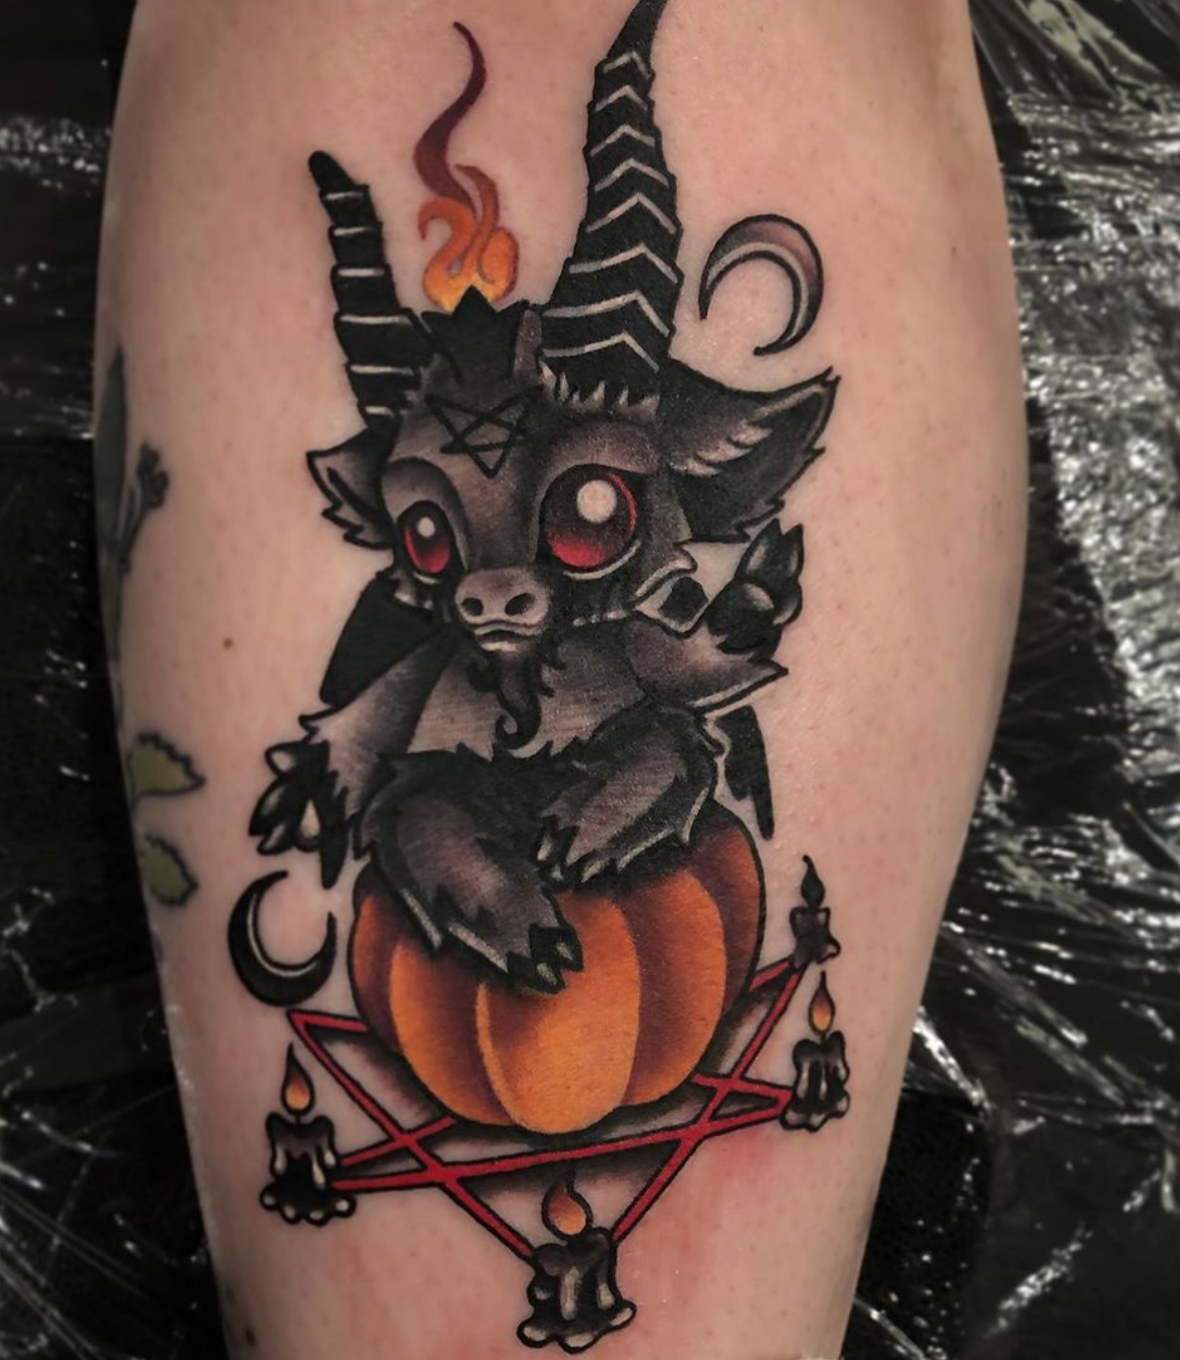 Scary goat tattoo by Alexandra Fische